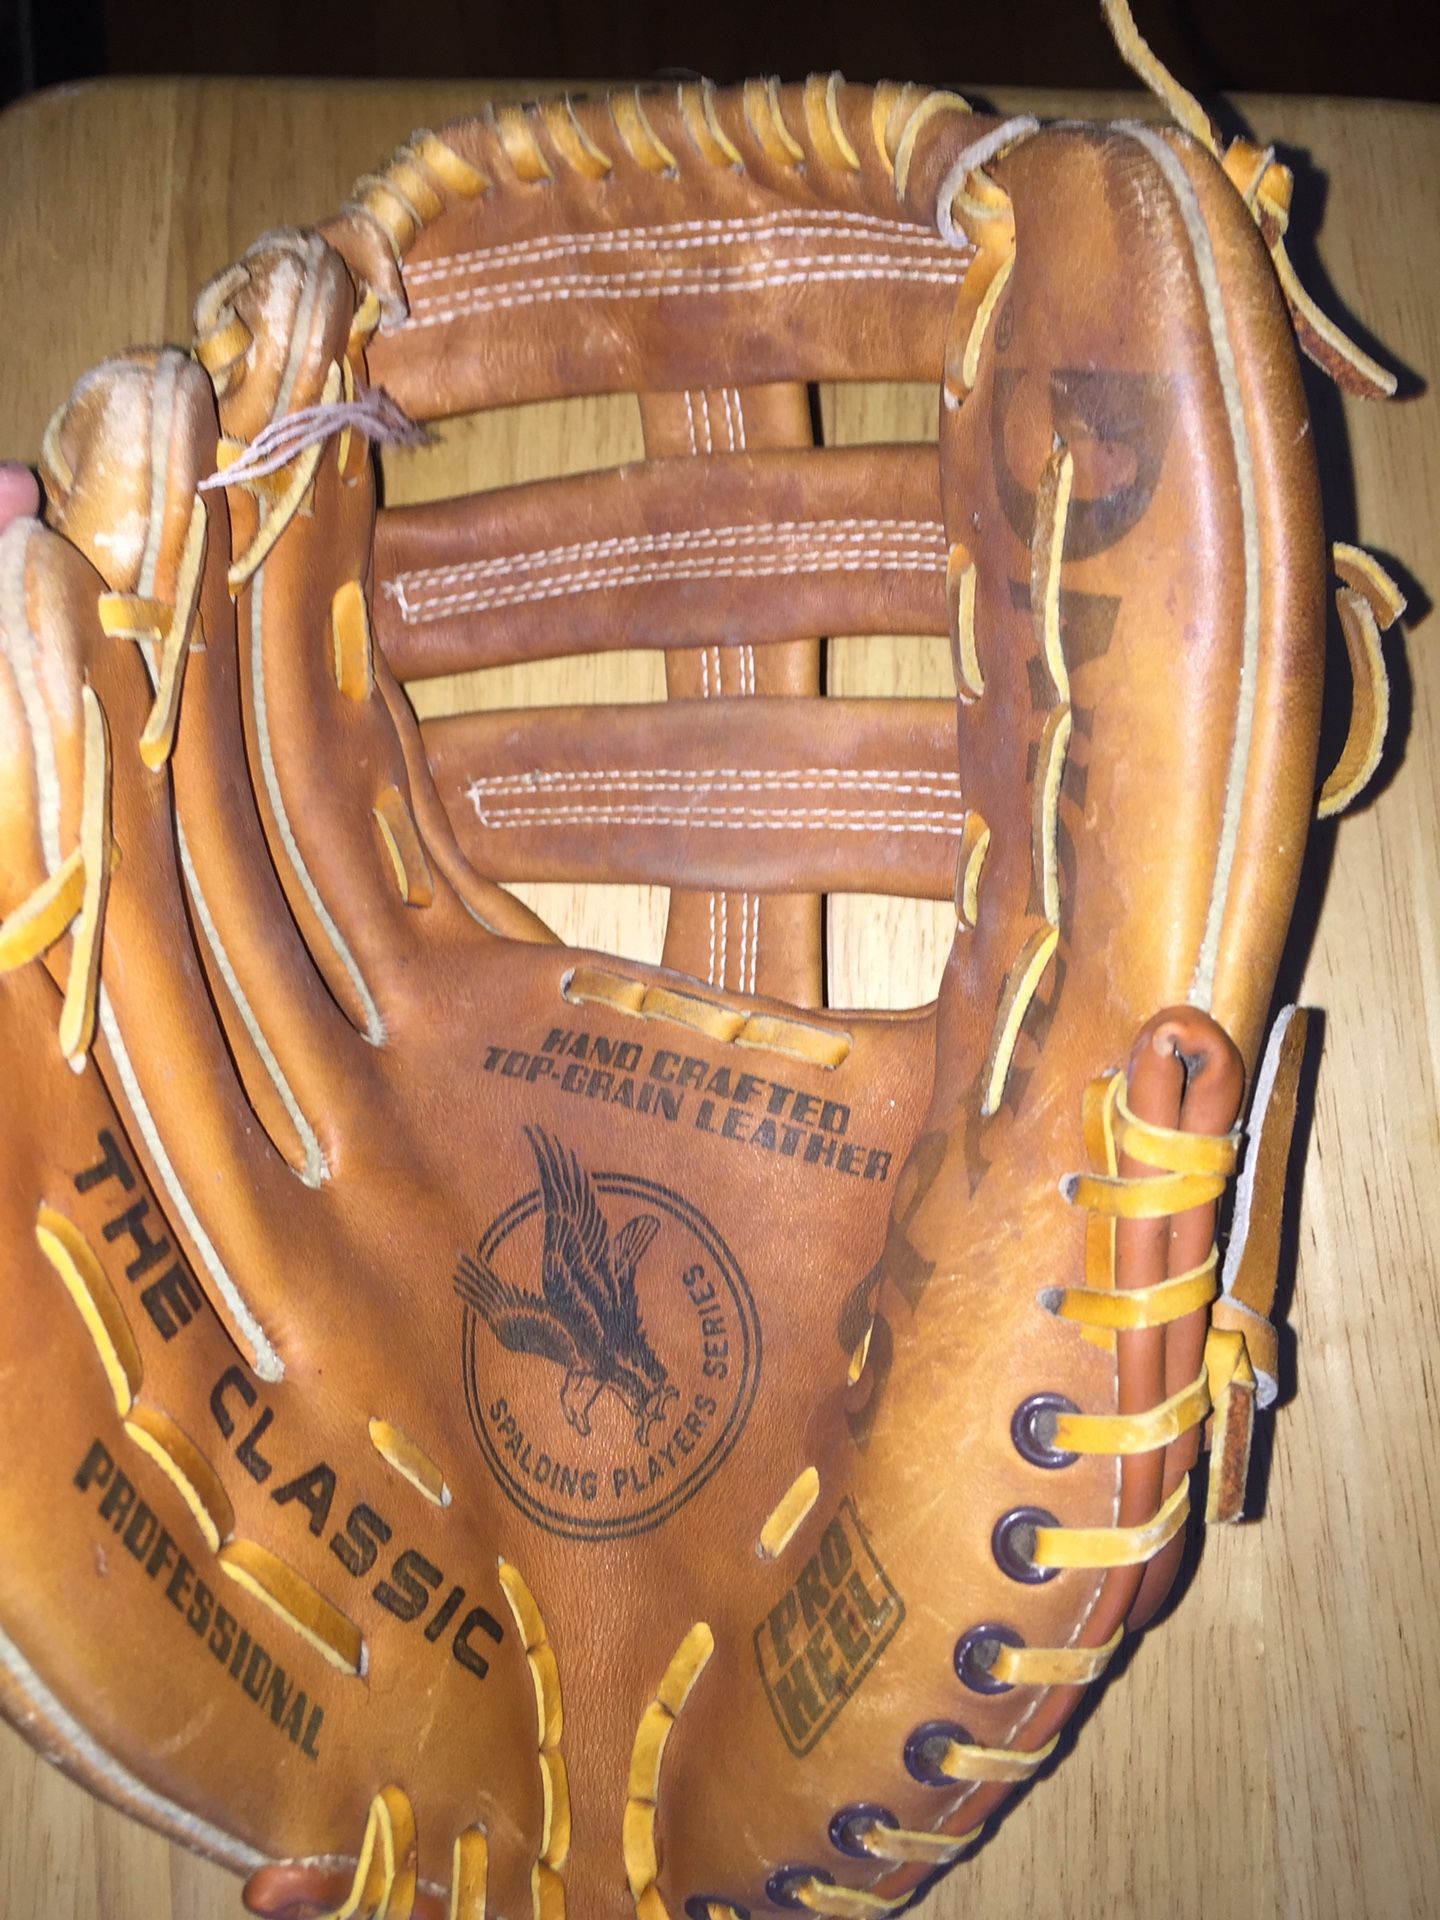 Spaulding  Leather softball glove "The Classic" 